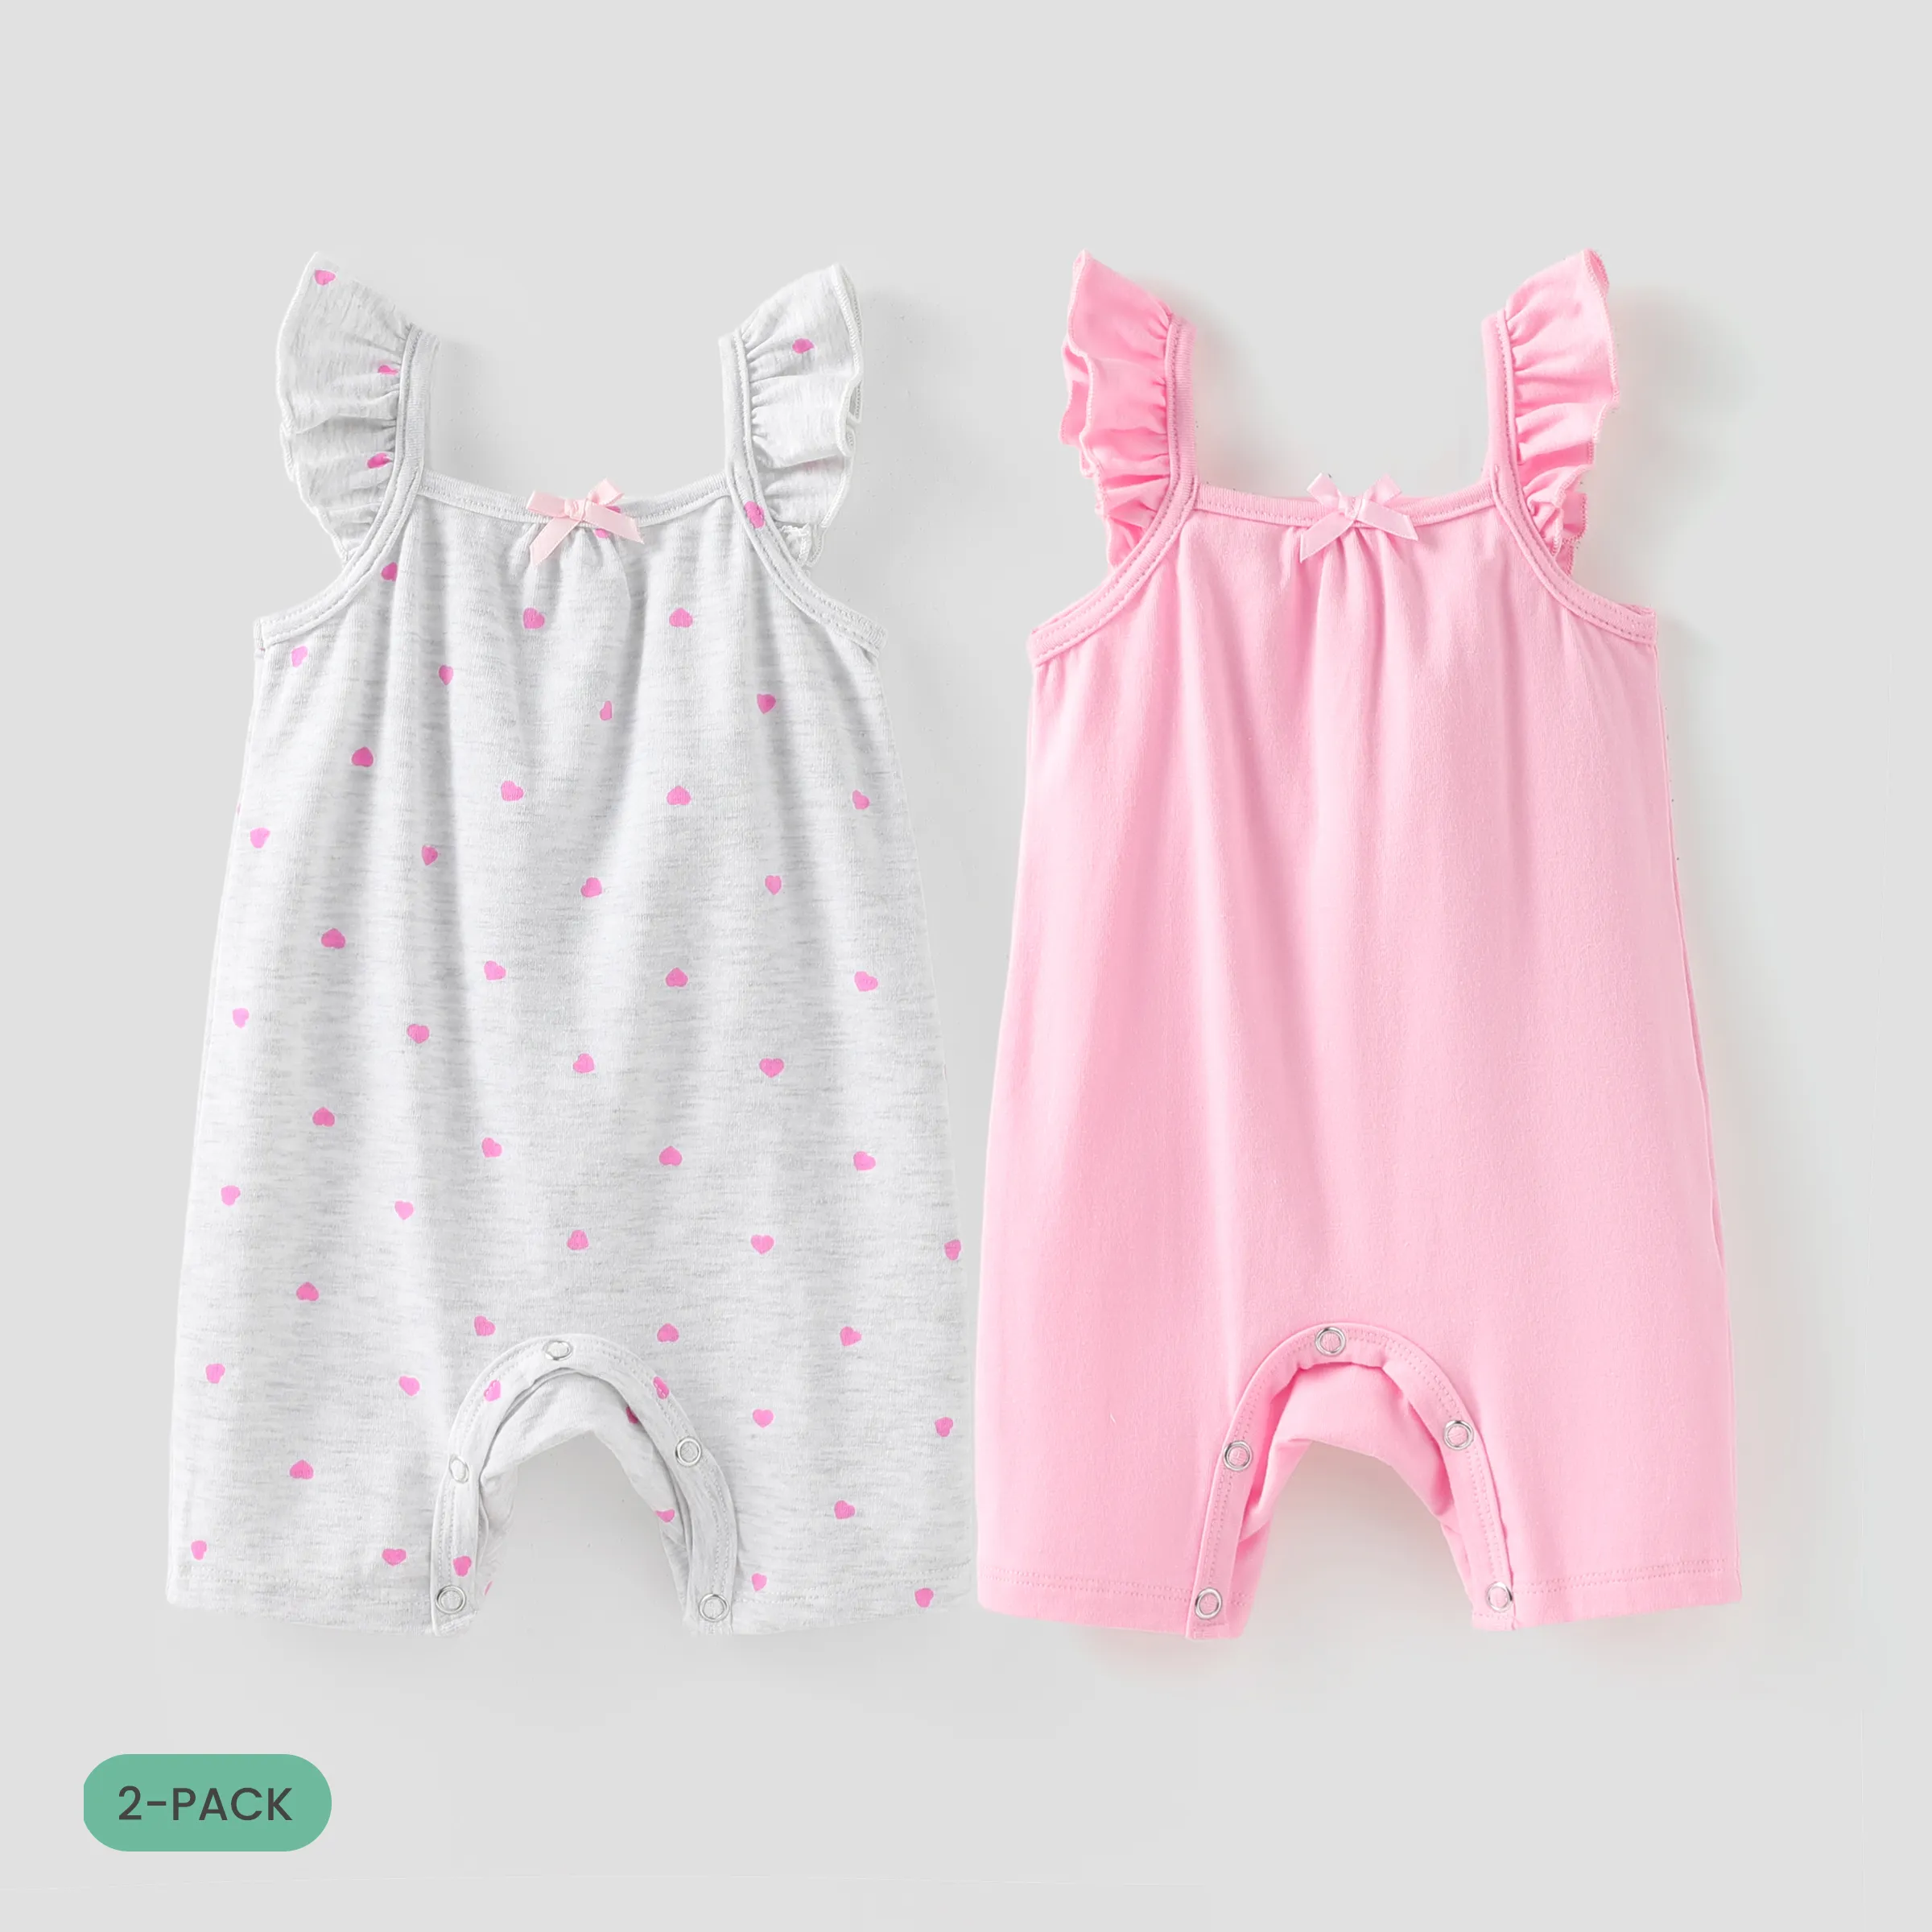 2-Pack Baby Girl Heart-shaped/Solid Print Ruffled Rompers